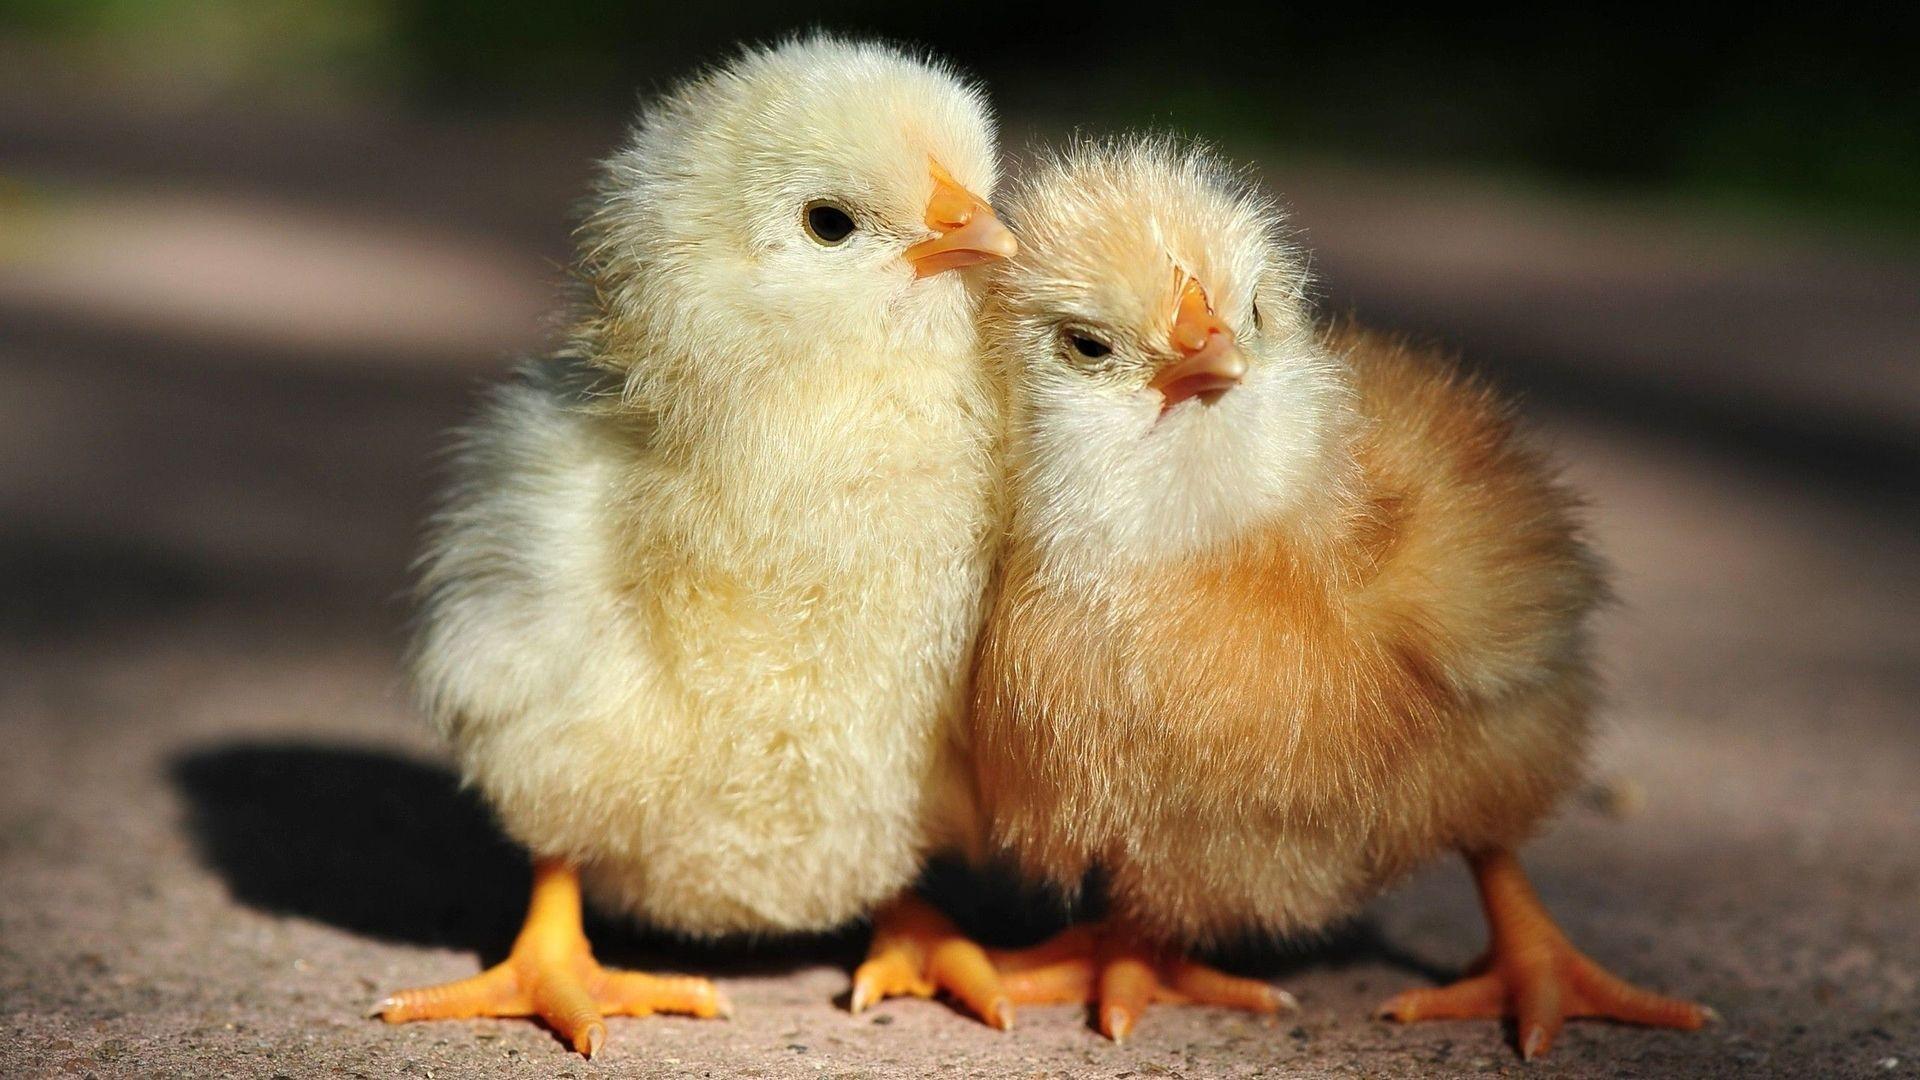 Chick Wallpaper For Ipad, Chick, Animal